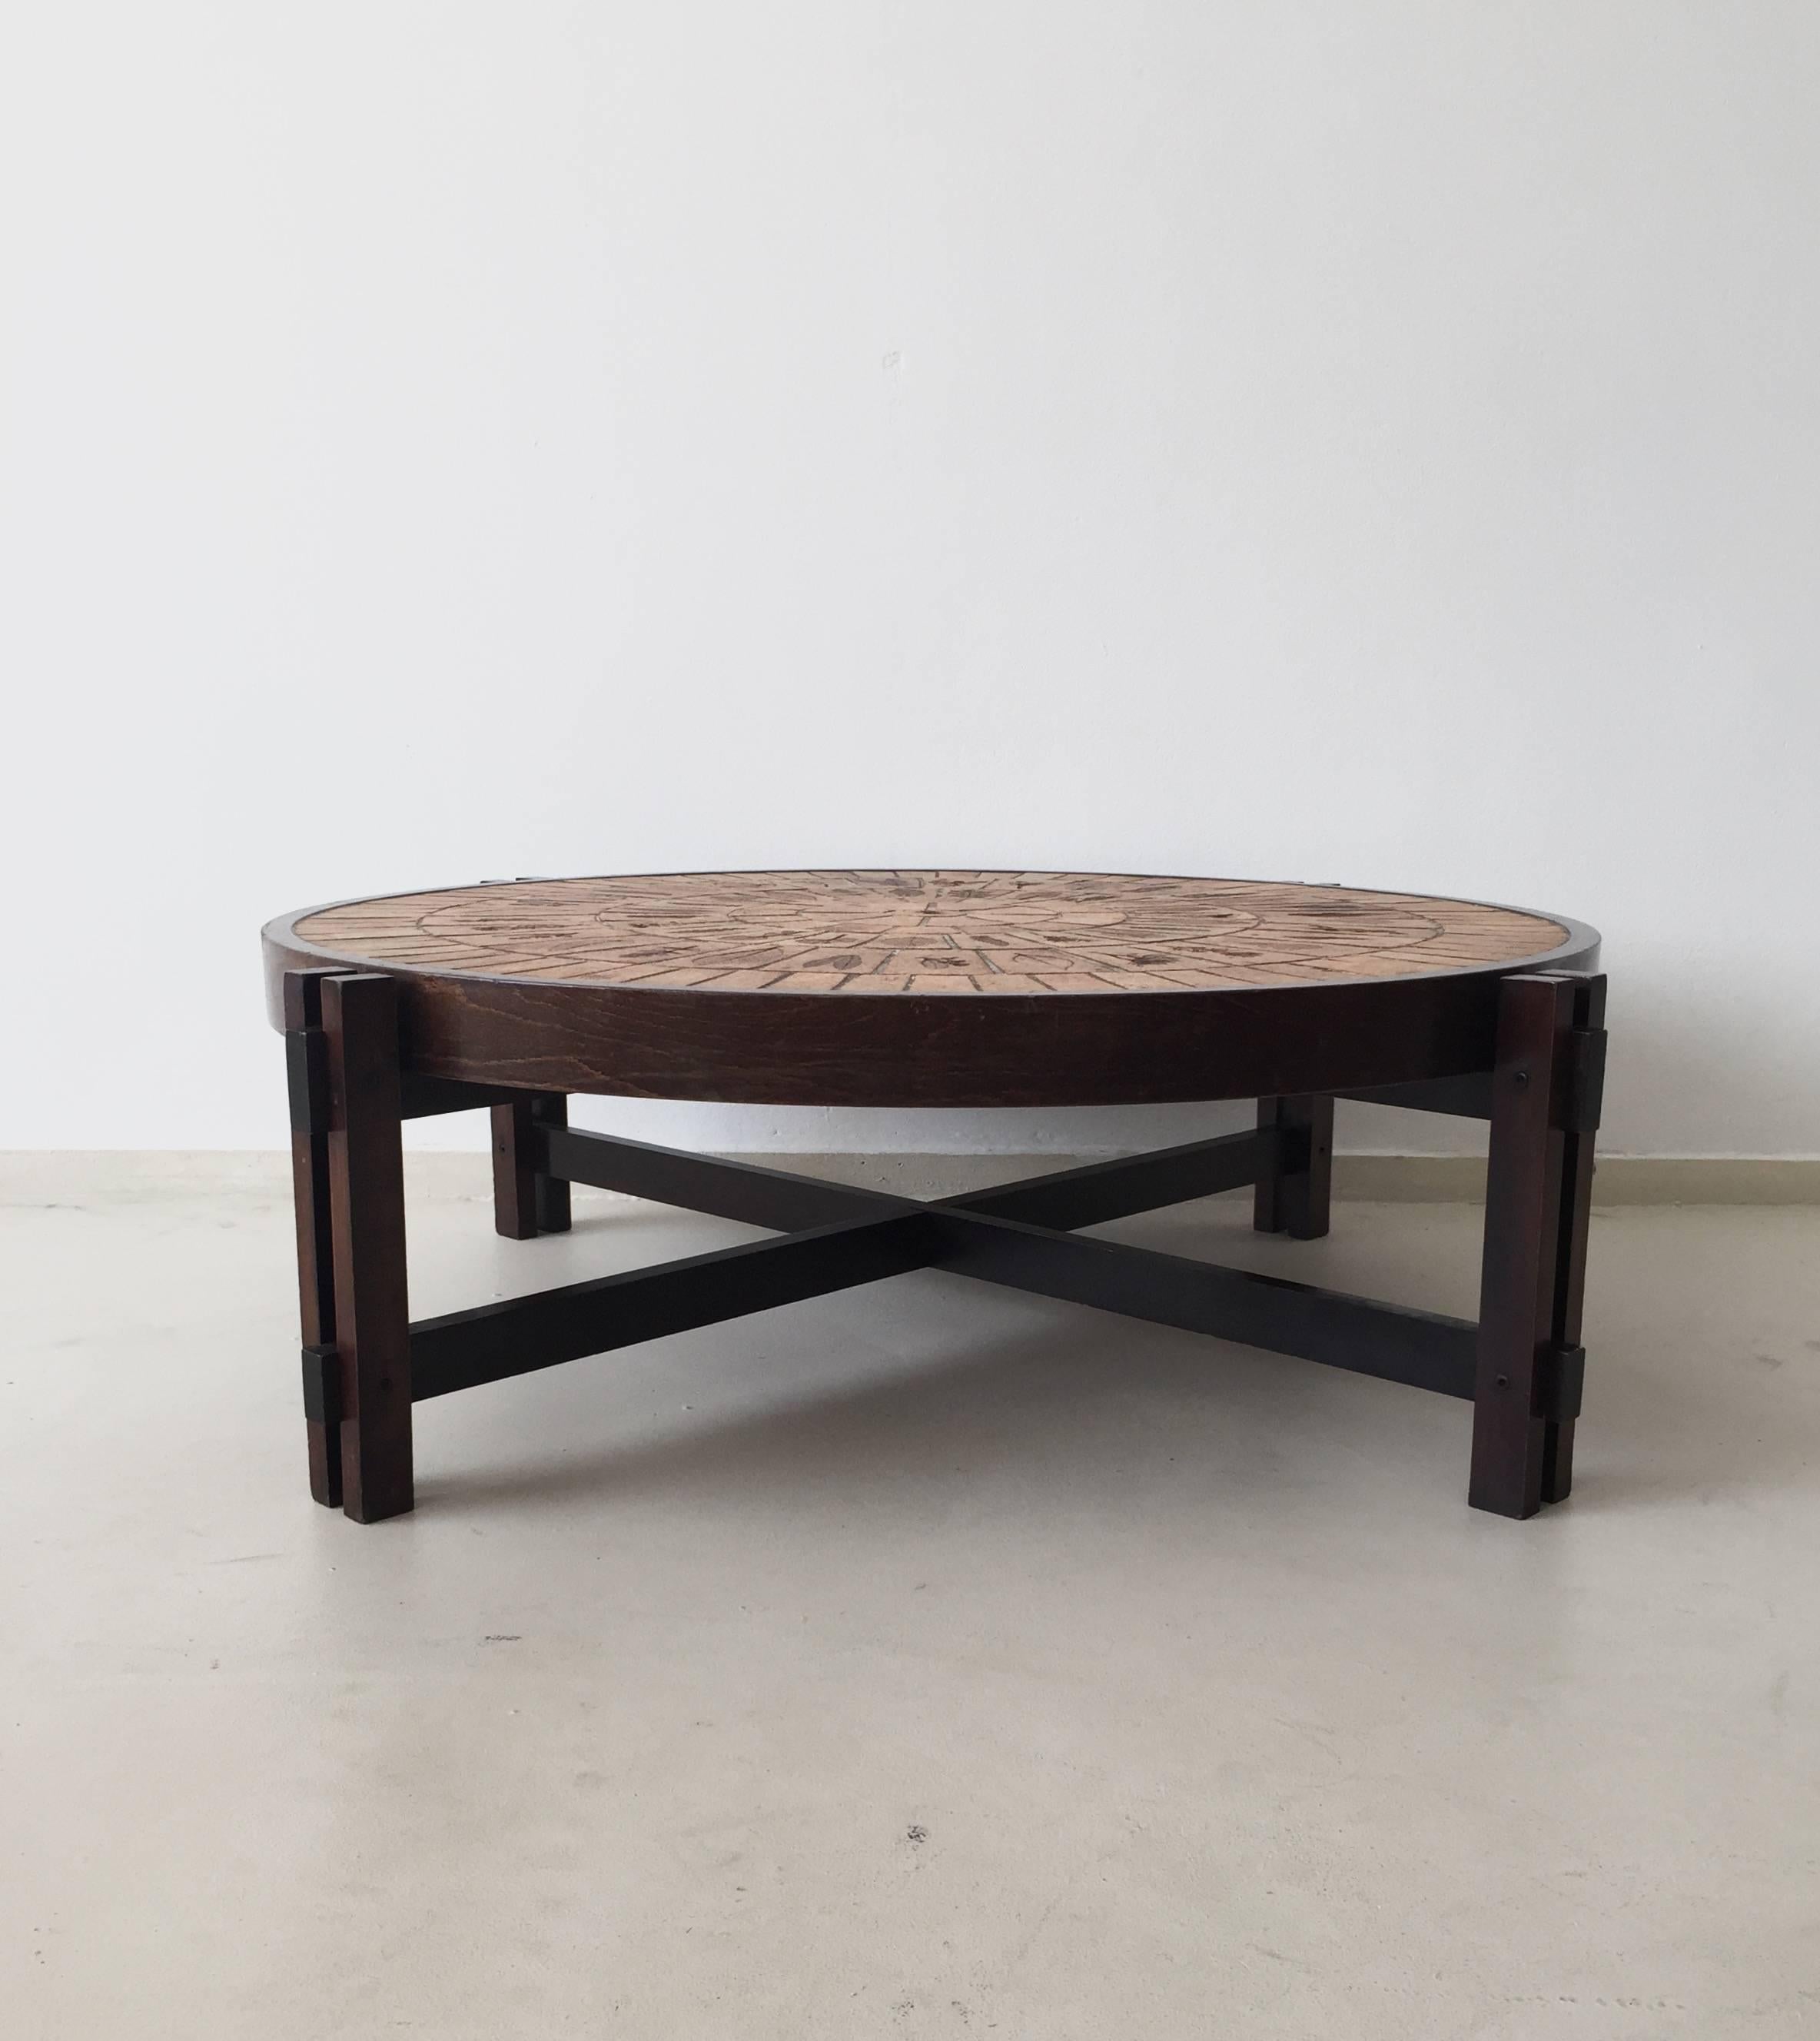 This coffee table was designed by Roger Capron during the 1960s and produced by the French manufacturer Atelier Capron. It features ceramic tiles on a wooden base. The table remains in a good vintage condition, with small signs of age and use.